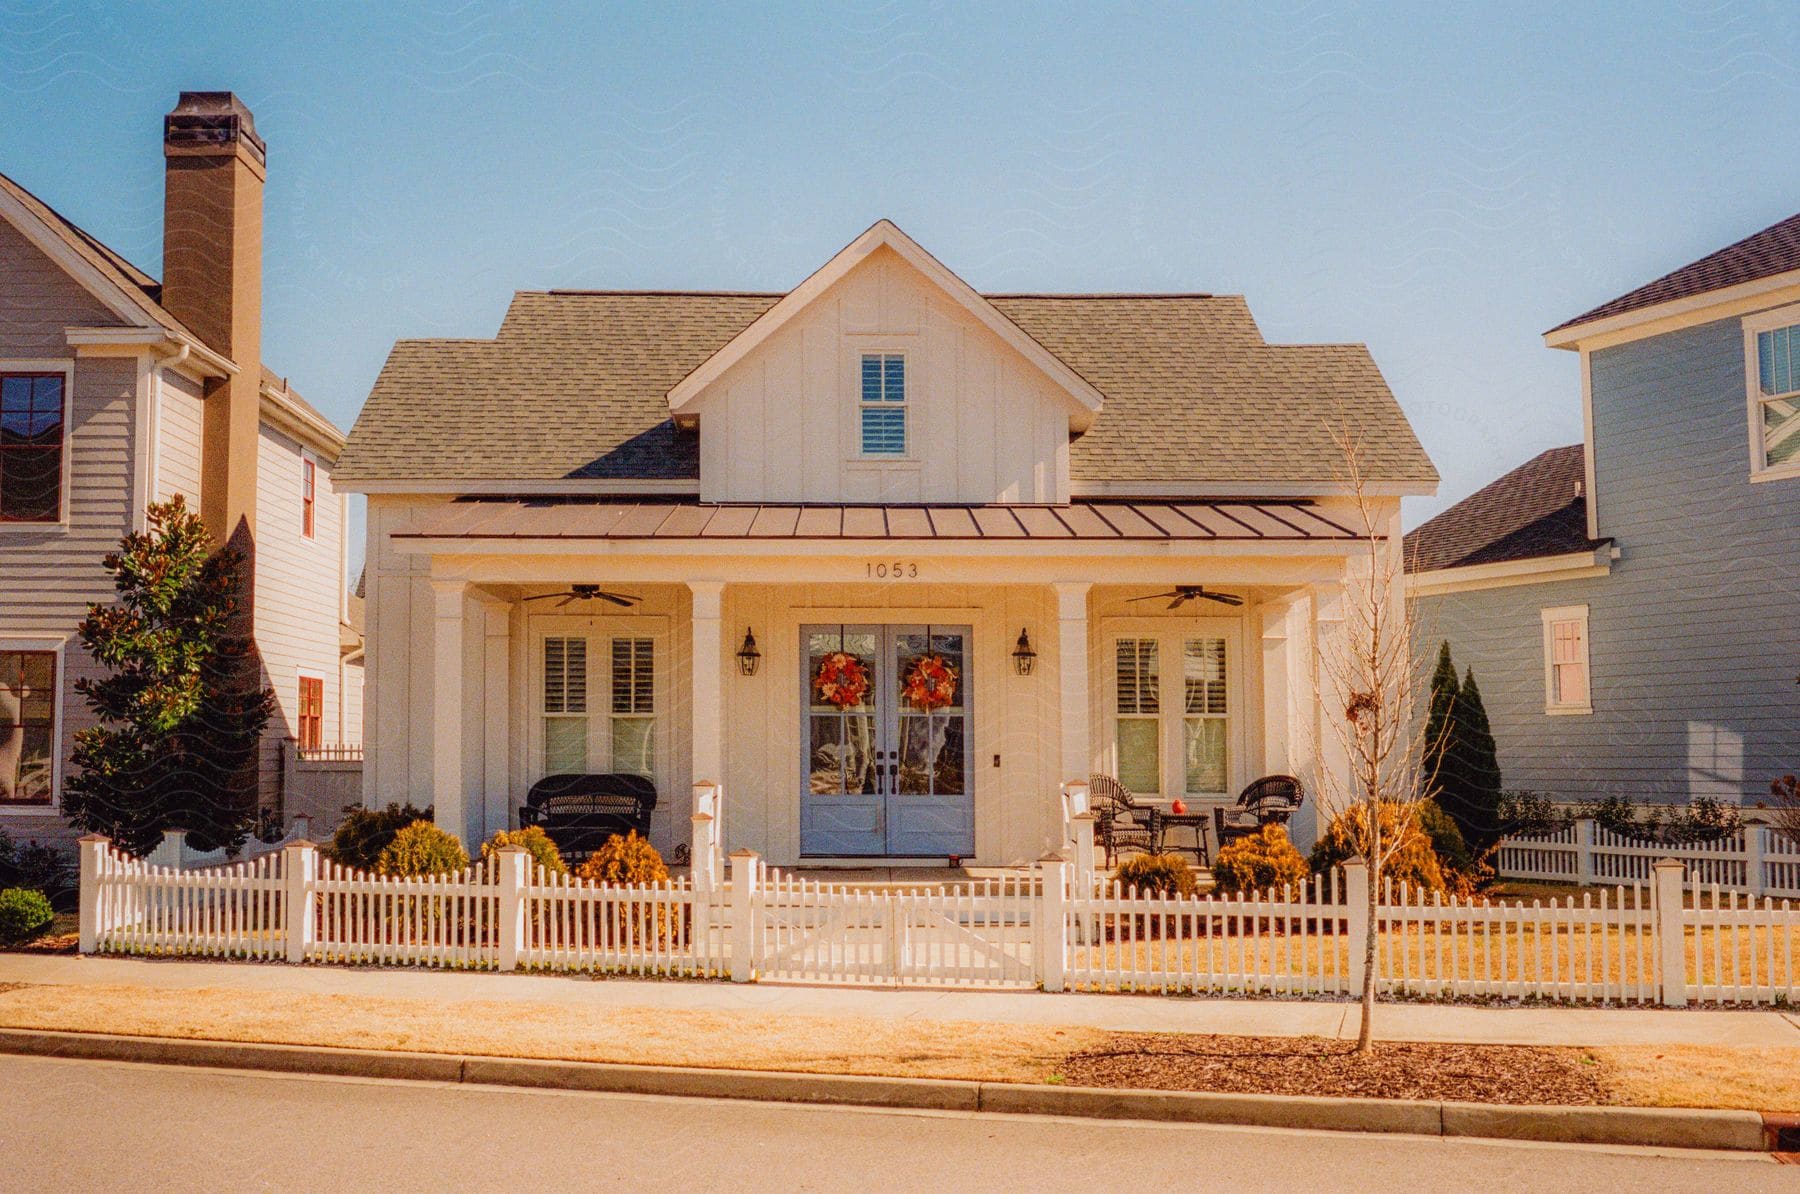 A house with white picket fence and a front porch with wreaths hanging on the double front door